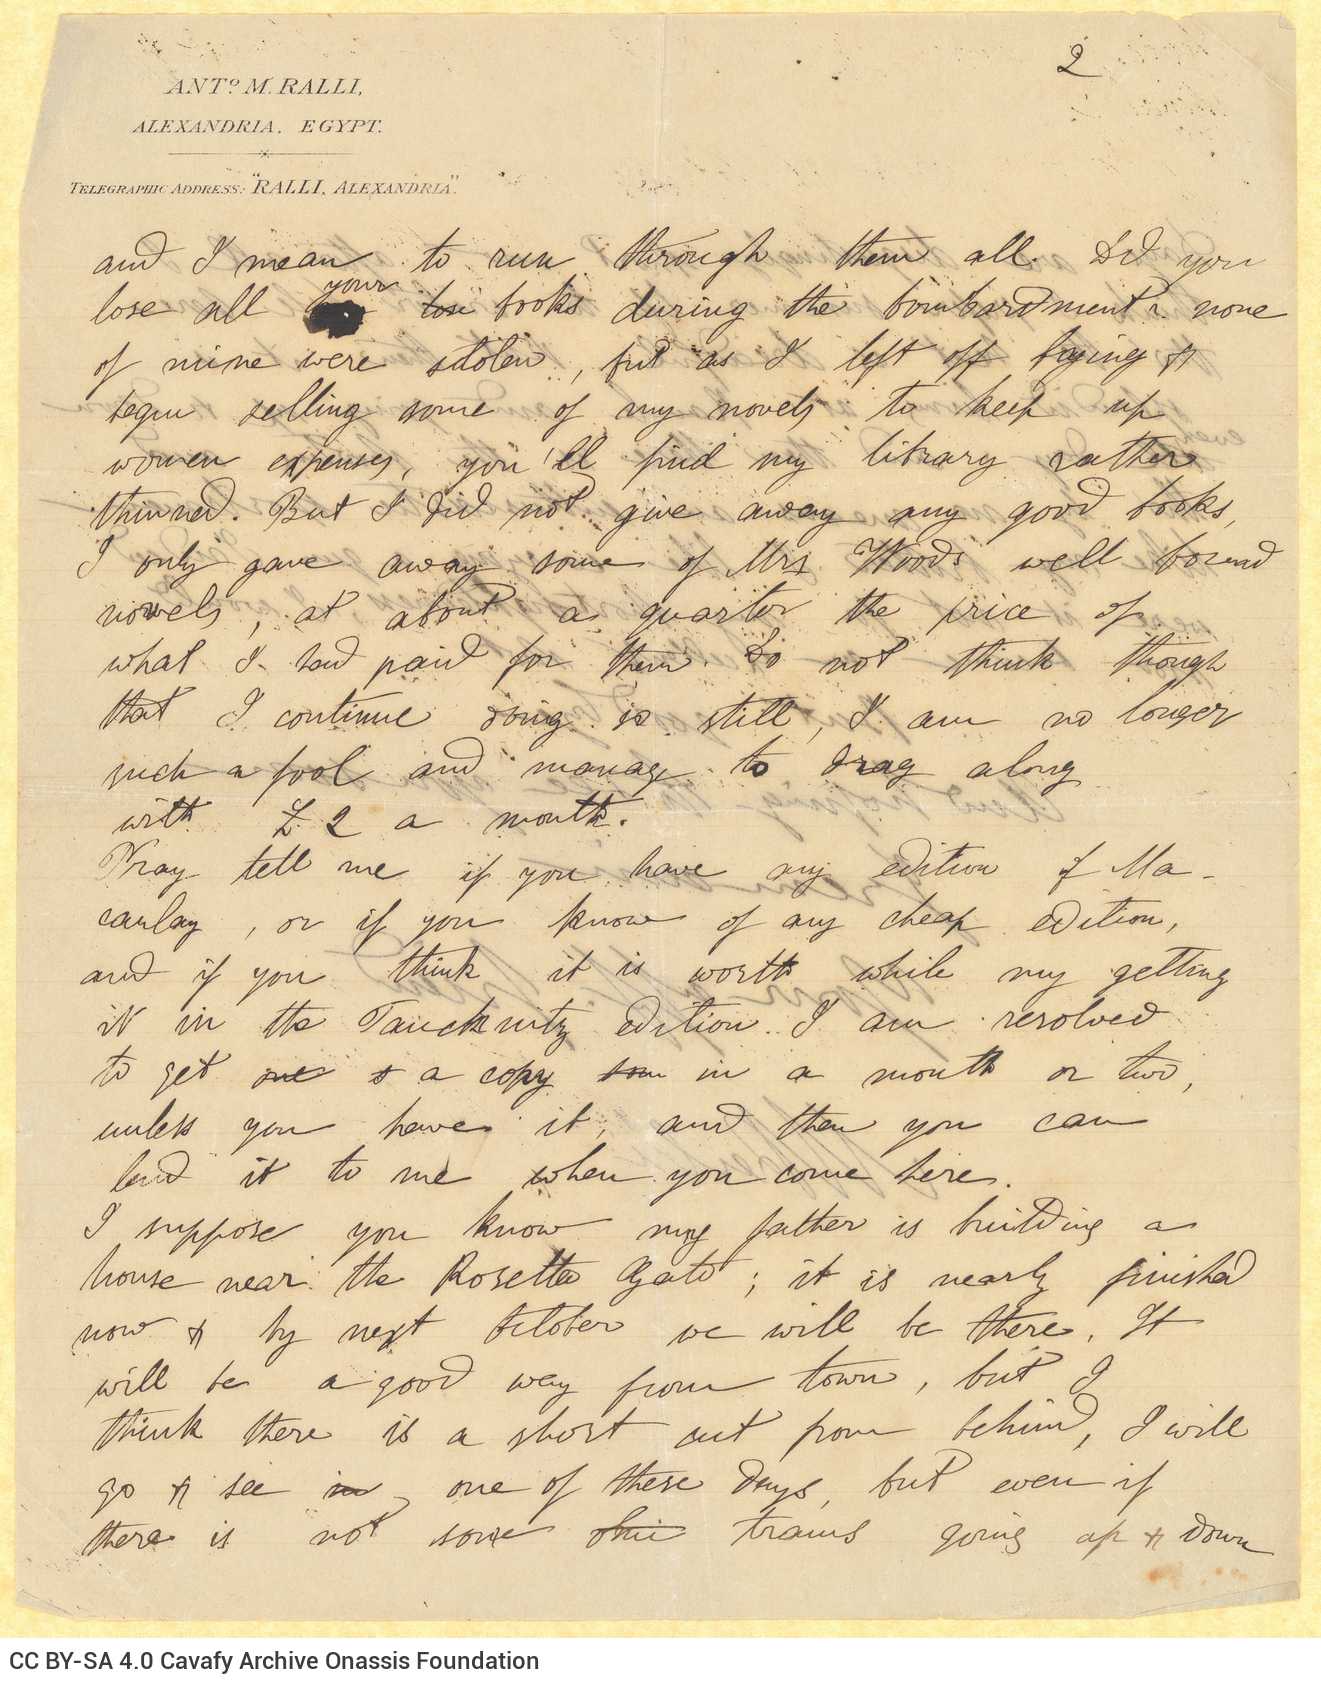 Handwritten letter by Mike Ralli to Cavafy on two sheets, with notes on all sides. Account of everyday life in Alexandria and